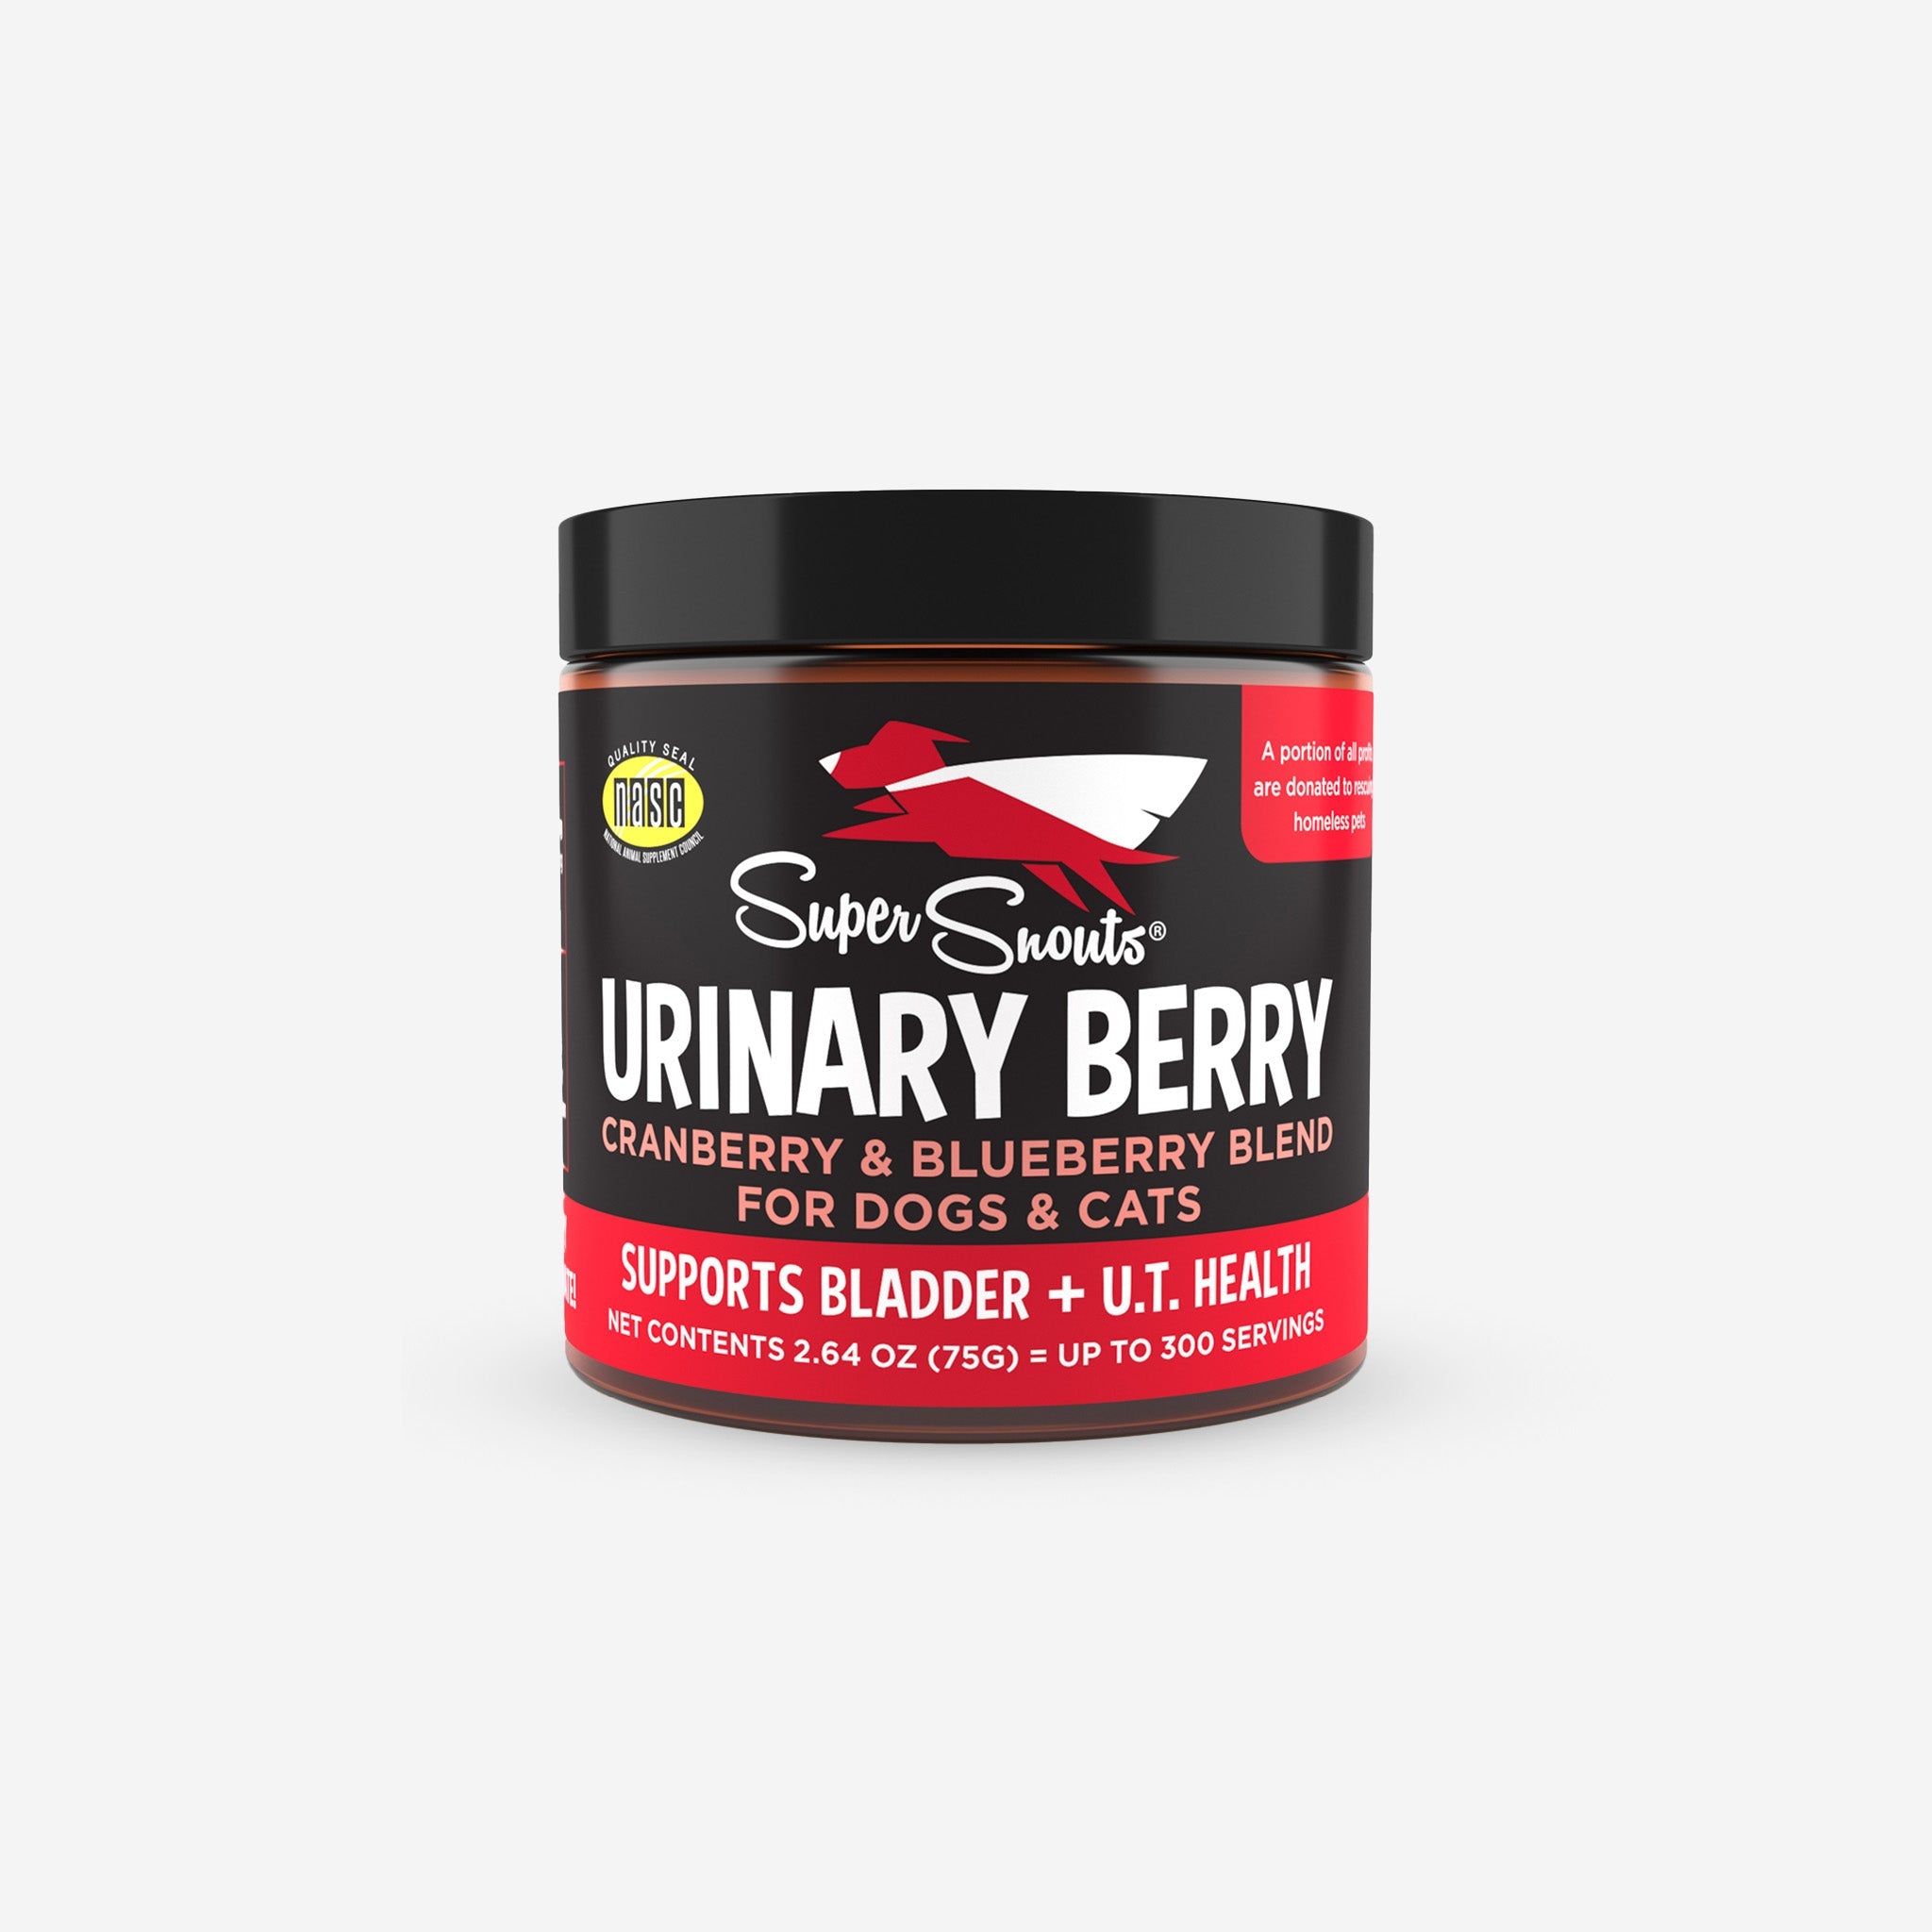 Super Snouts Urinary Berry for Bladder + U.T. Health in Dogs & Cats